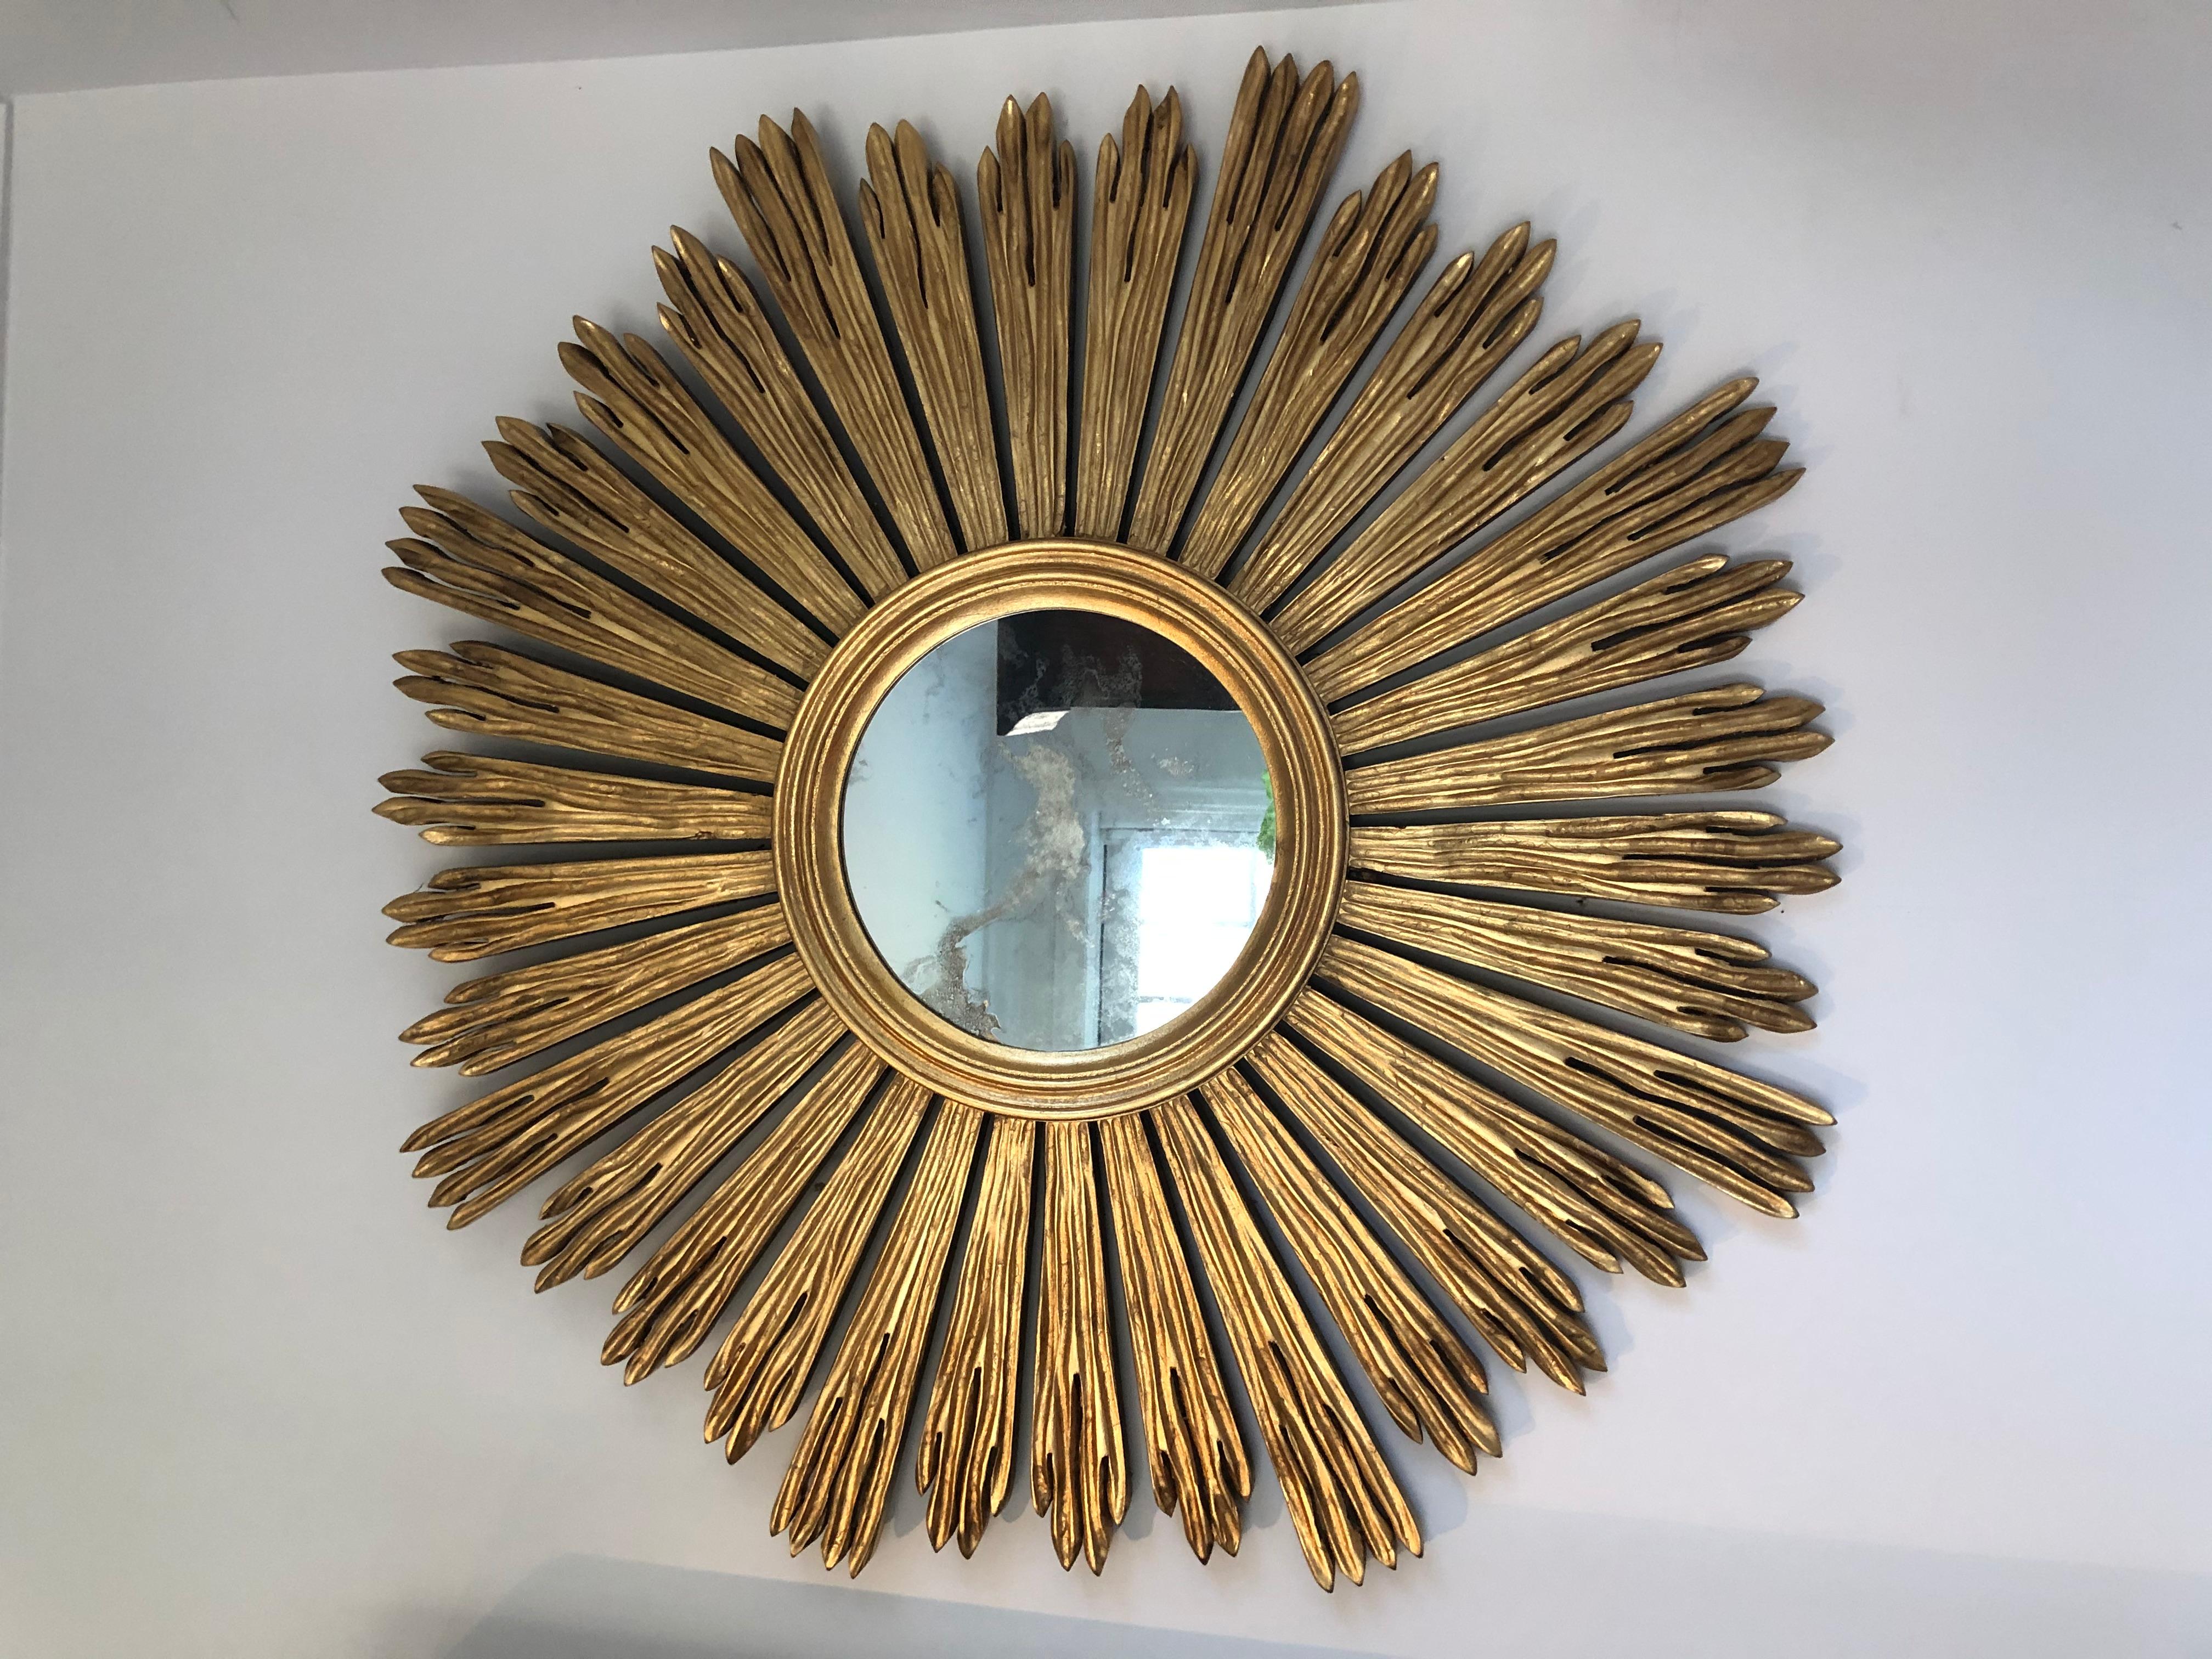 Vintage sunburst mirror in gilded wood and antiqued glass. The piece has wonderful patina and is marked Italy on reverse.